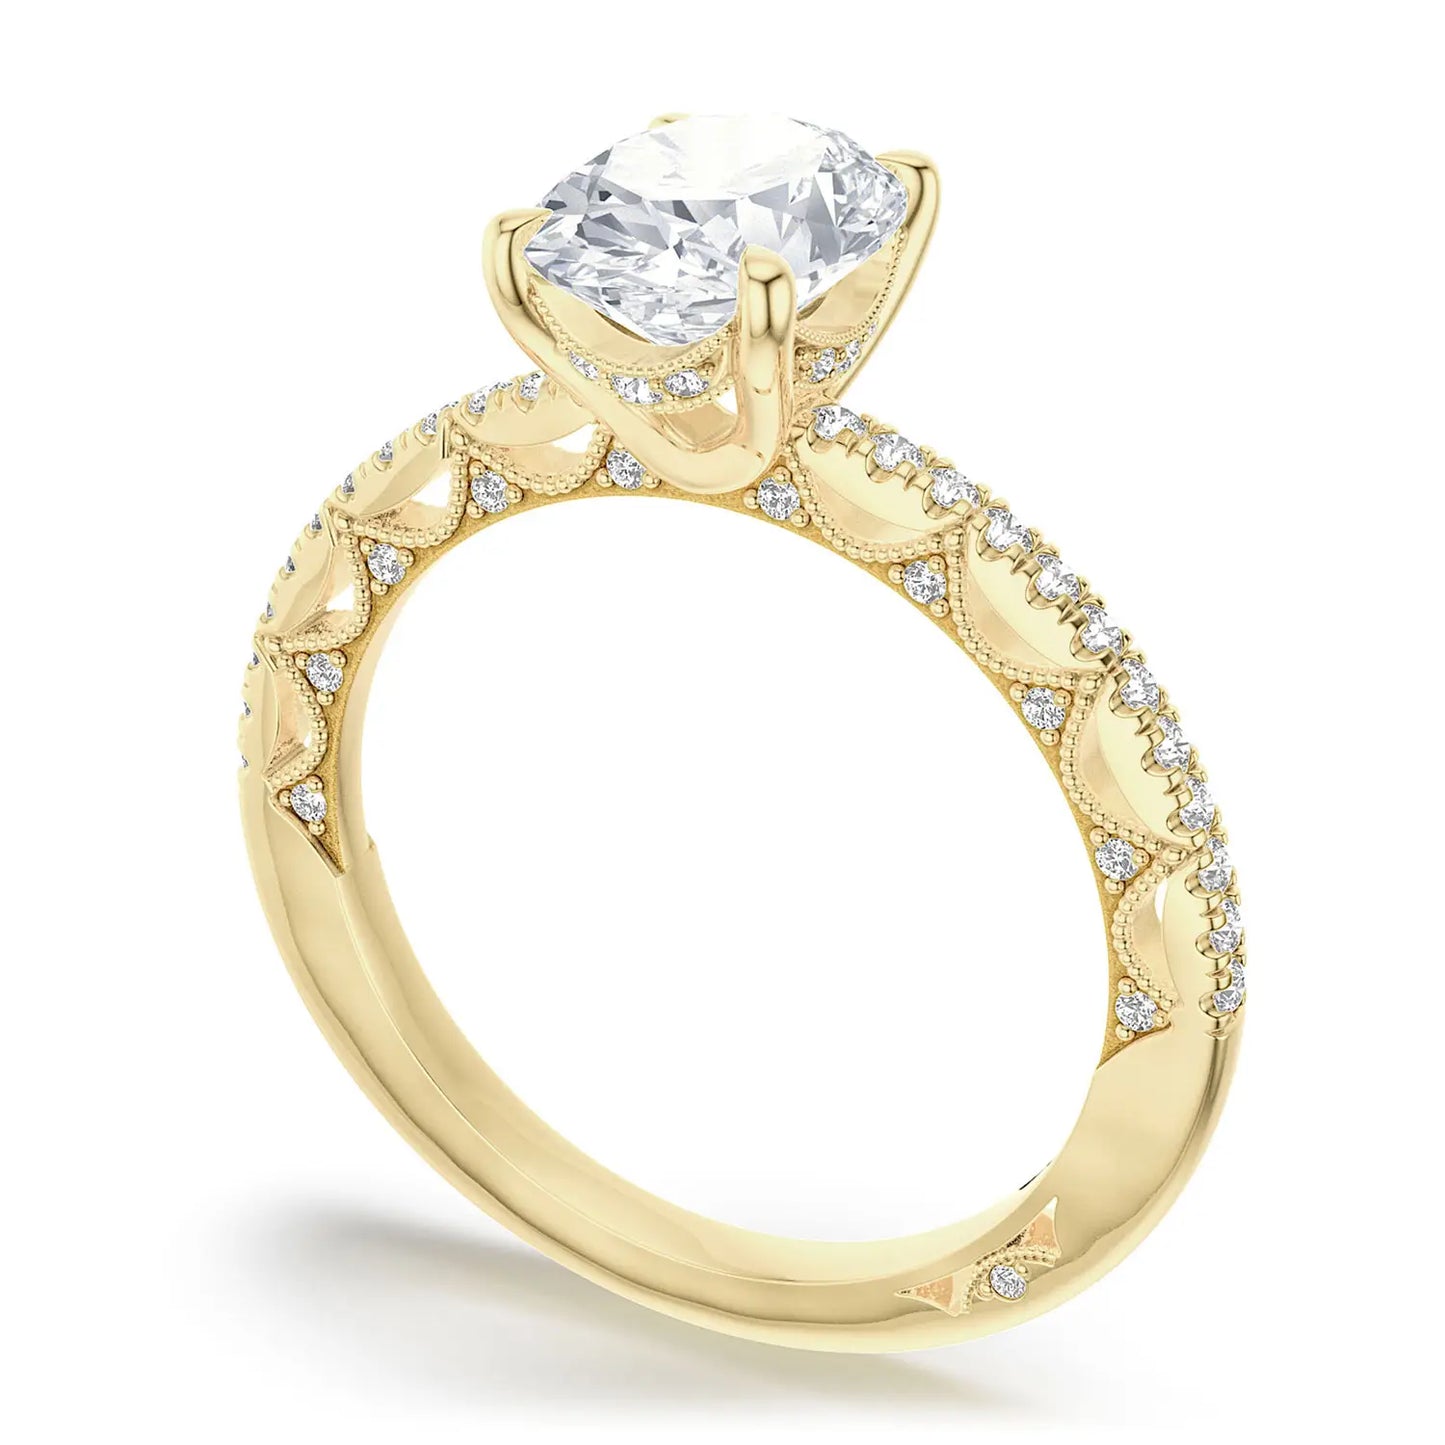 Oval Solitaire Engagement Ring Style # 272017 OV